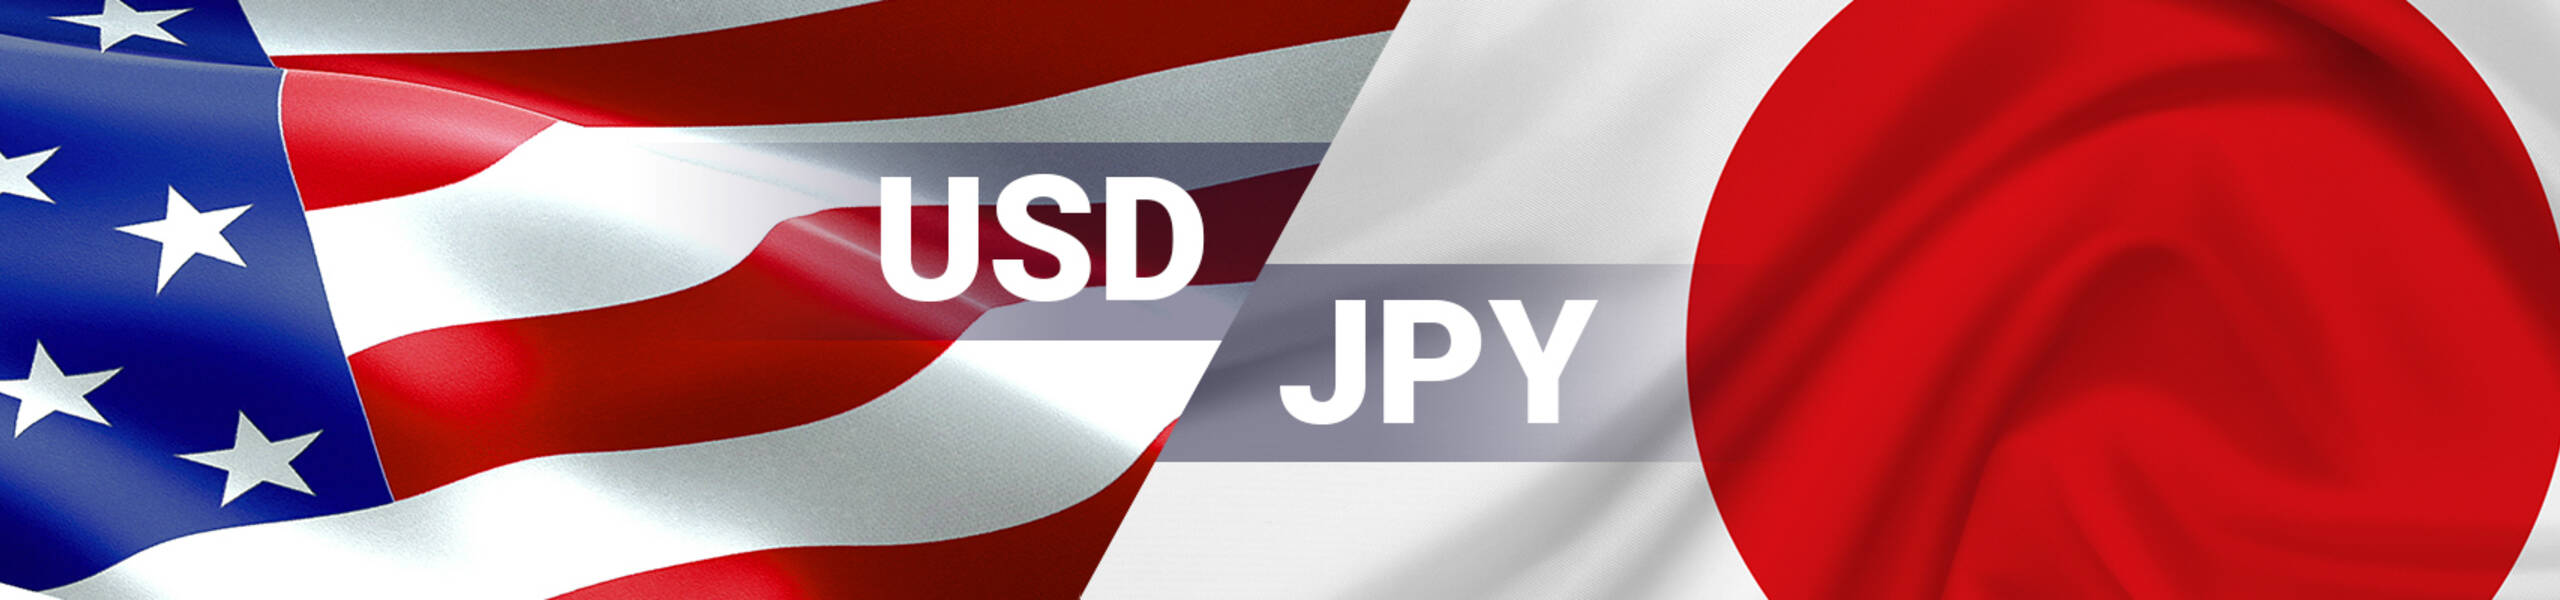 USD/JPY Dailyレポート 2018/04/24